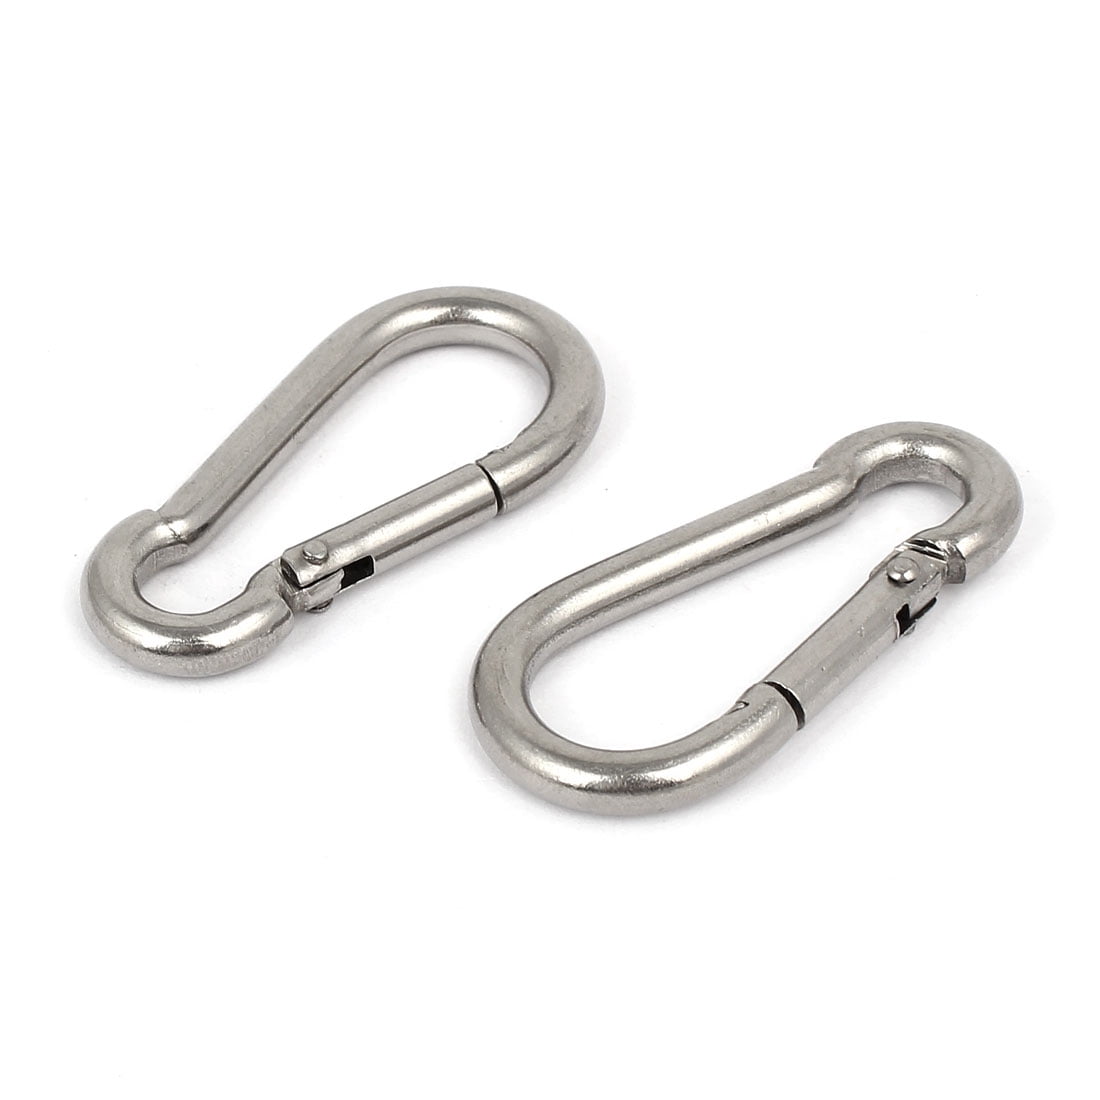 5mm x 50mm Carbine locking nut carabiner snap spring hook A4 316 stainless steel 